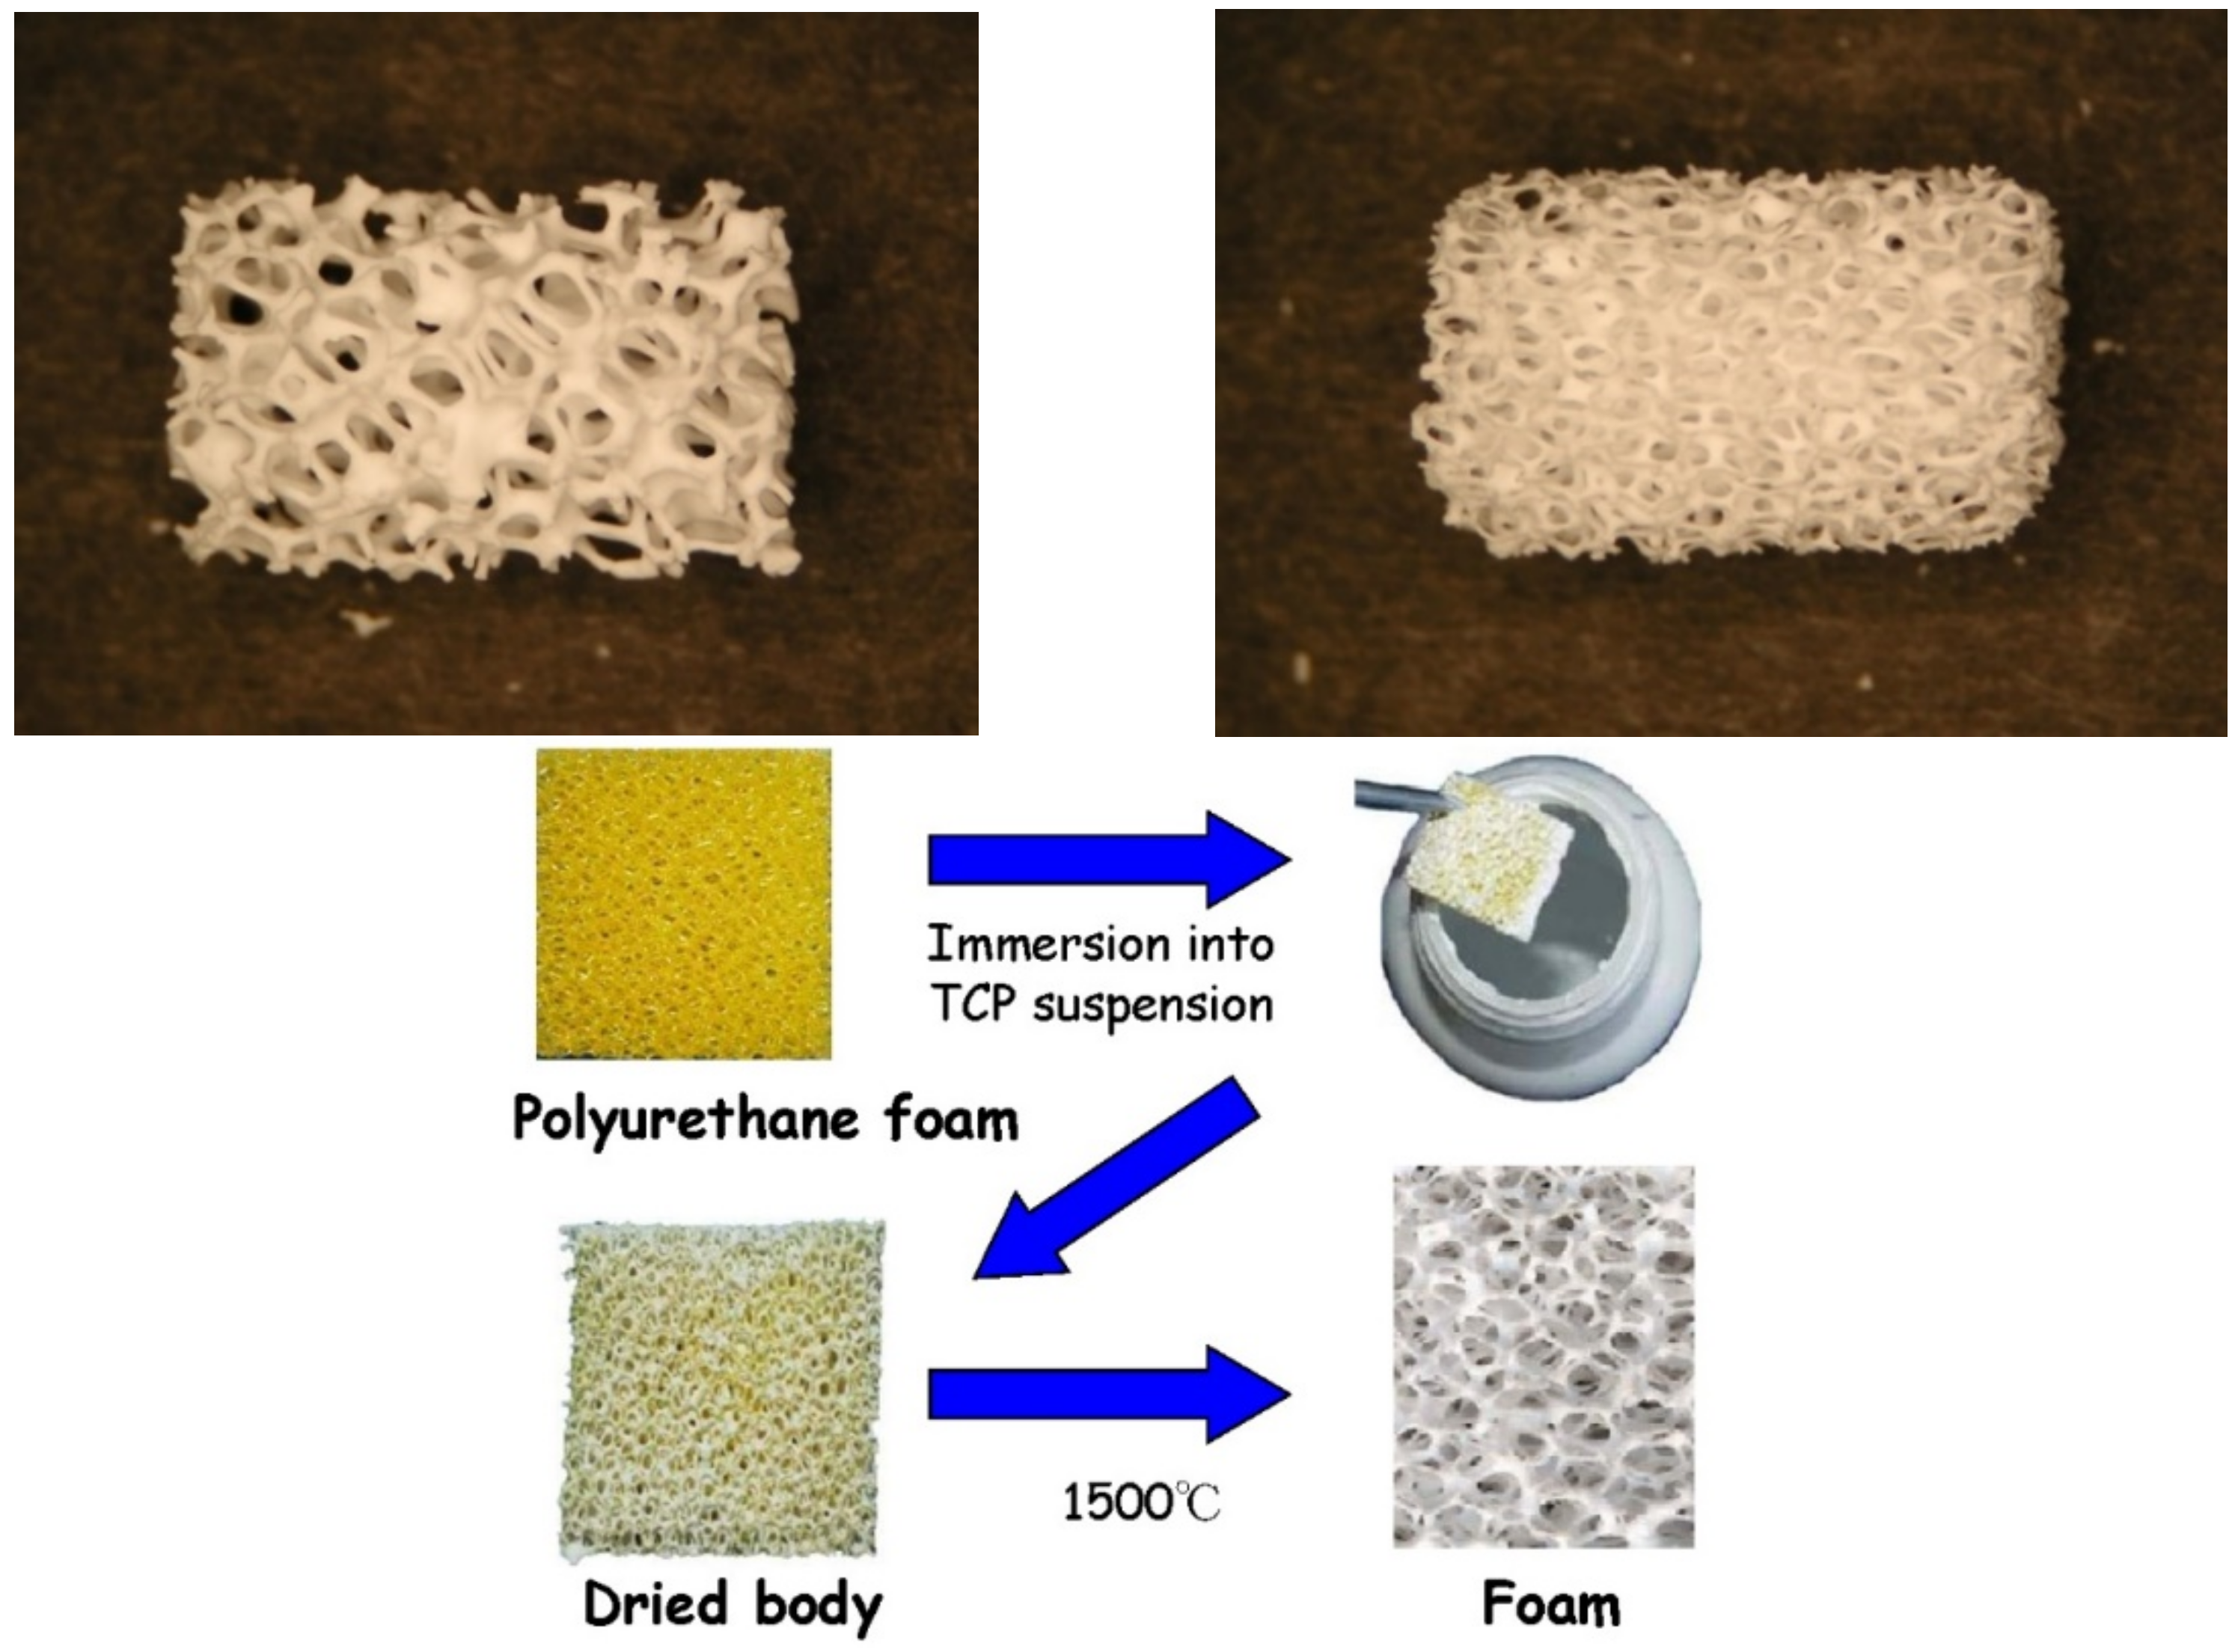 A block of synthetic micromacroporous biphasic calcium-phosphate (BCP)